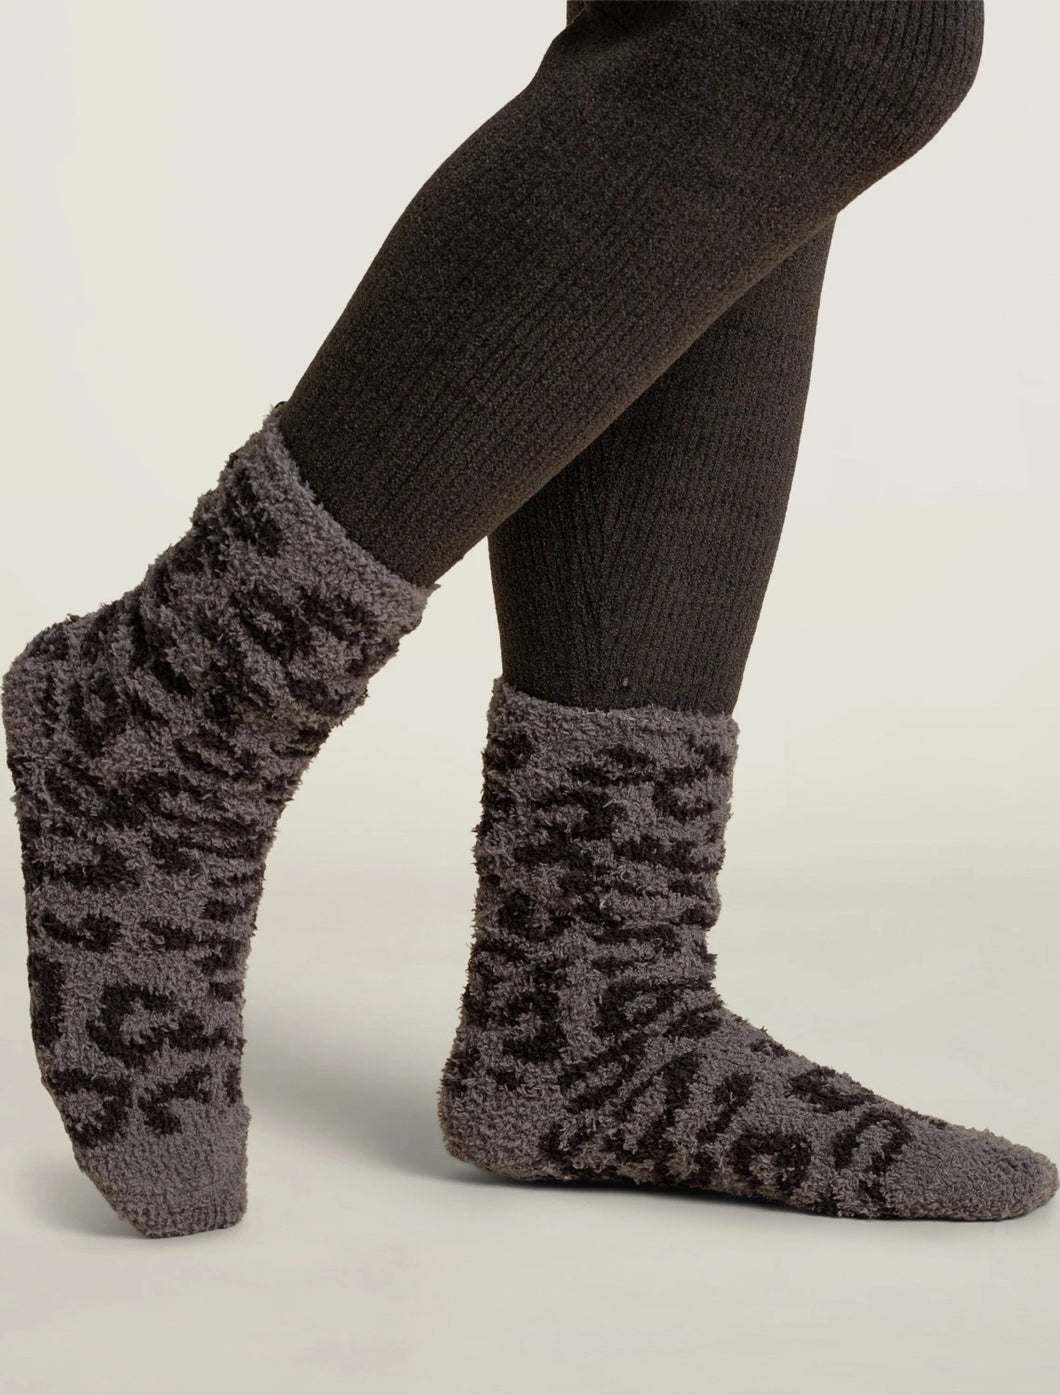 CozyChic® Women's Barefoot In The Wild Socks- Graphite/Carbon